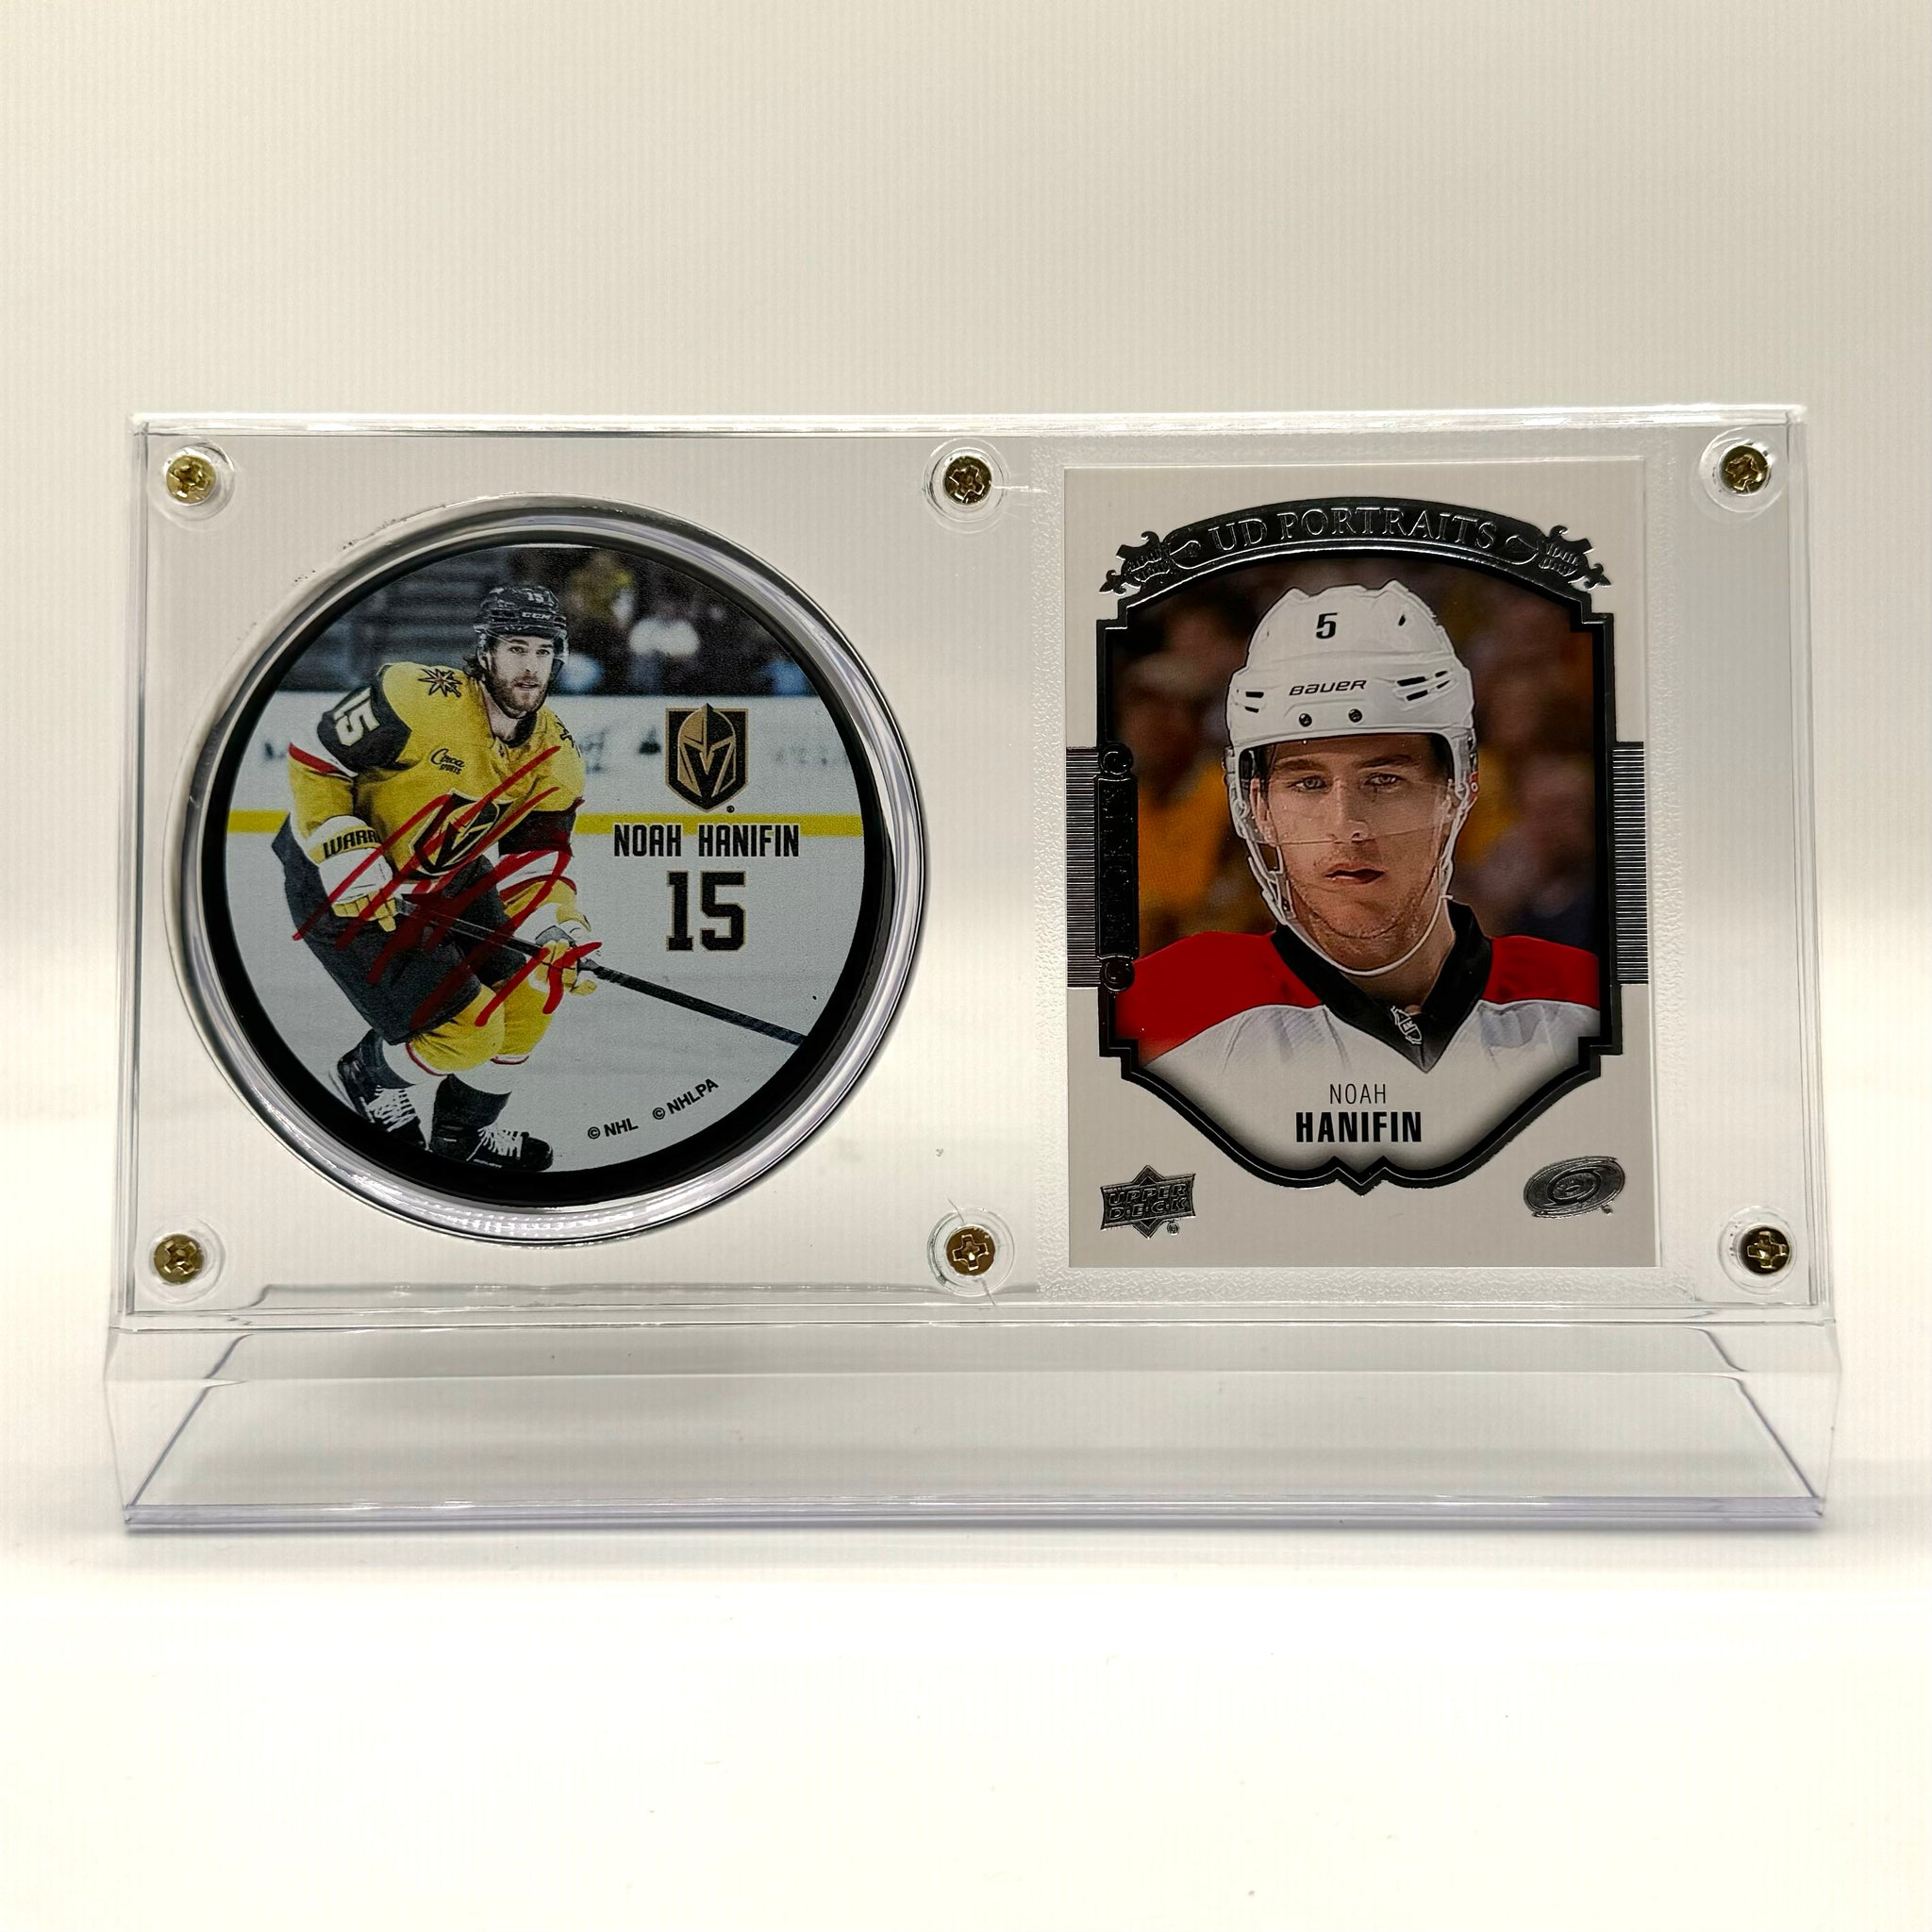 Noah Hanifin Vegas Golden Knights Autographed Hockey Puck and Rookie Trading Card Case (White Card)